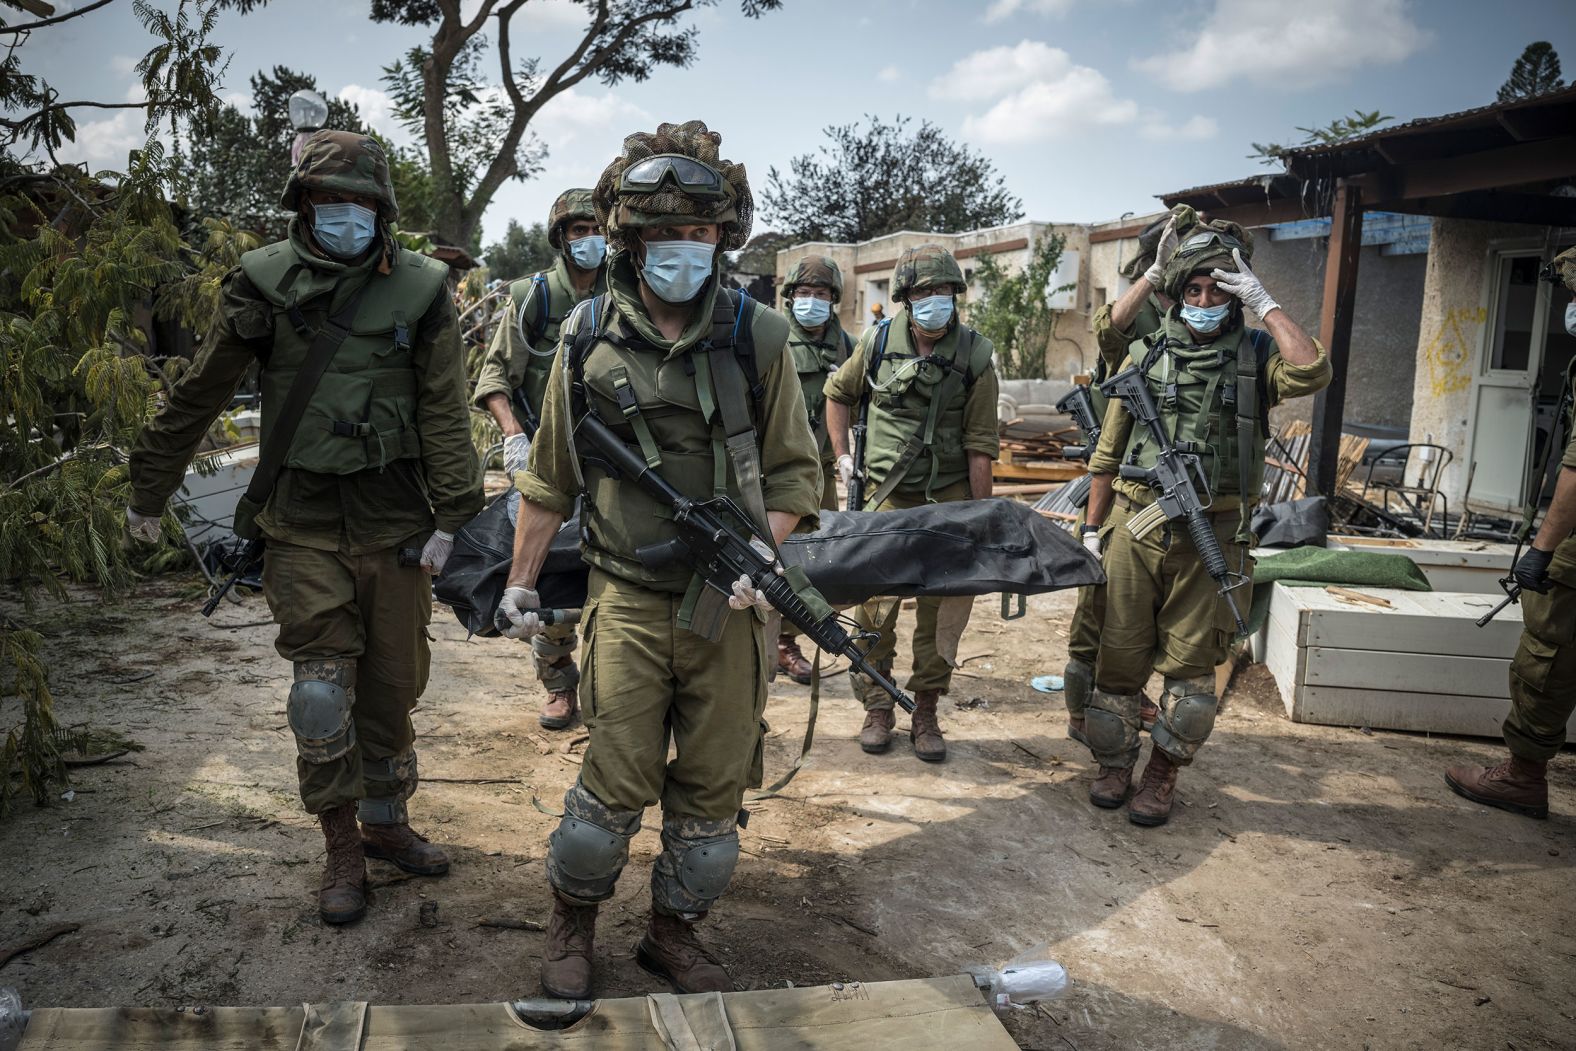 Israeli soldiers carry a body in Kfar Aza, Israel, on Tuesday, October 10. Hamas militants carried out a "massacre" in Kfar Aza during their attacks over the weekend, <a href="index.php?page=&url=https%3A%2F%2Fwww.cnn.com%2Fmiddleeast%2Flive-news%2Fisrael-hamas-war-gaza-10-10-23%2Fh_7867b7563e54a0b29dddeada7e4c2722" target="_blank">the Israel Defense Forces told CNN</a>.